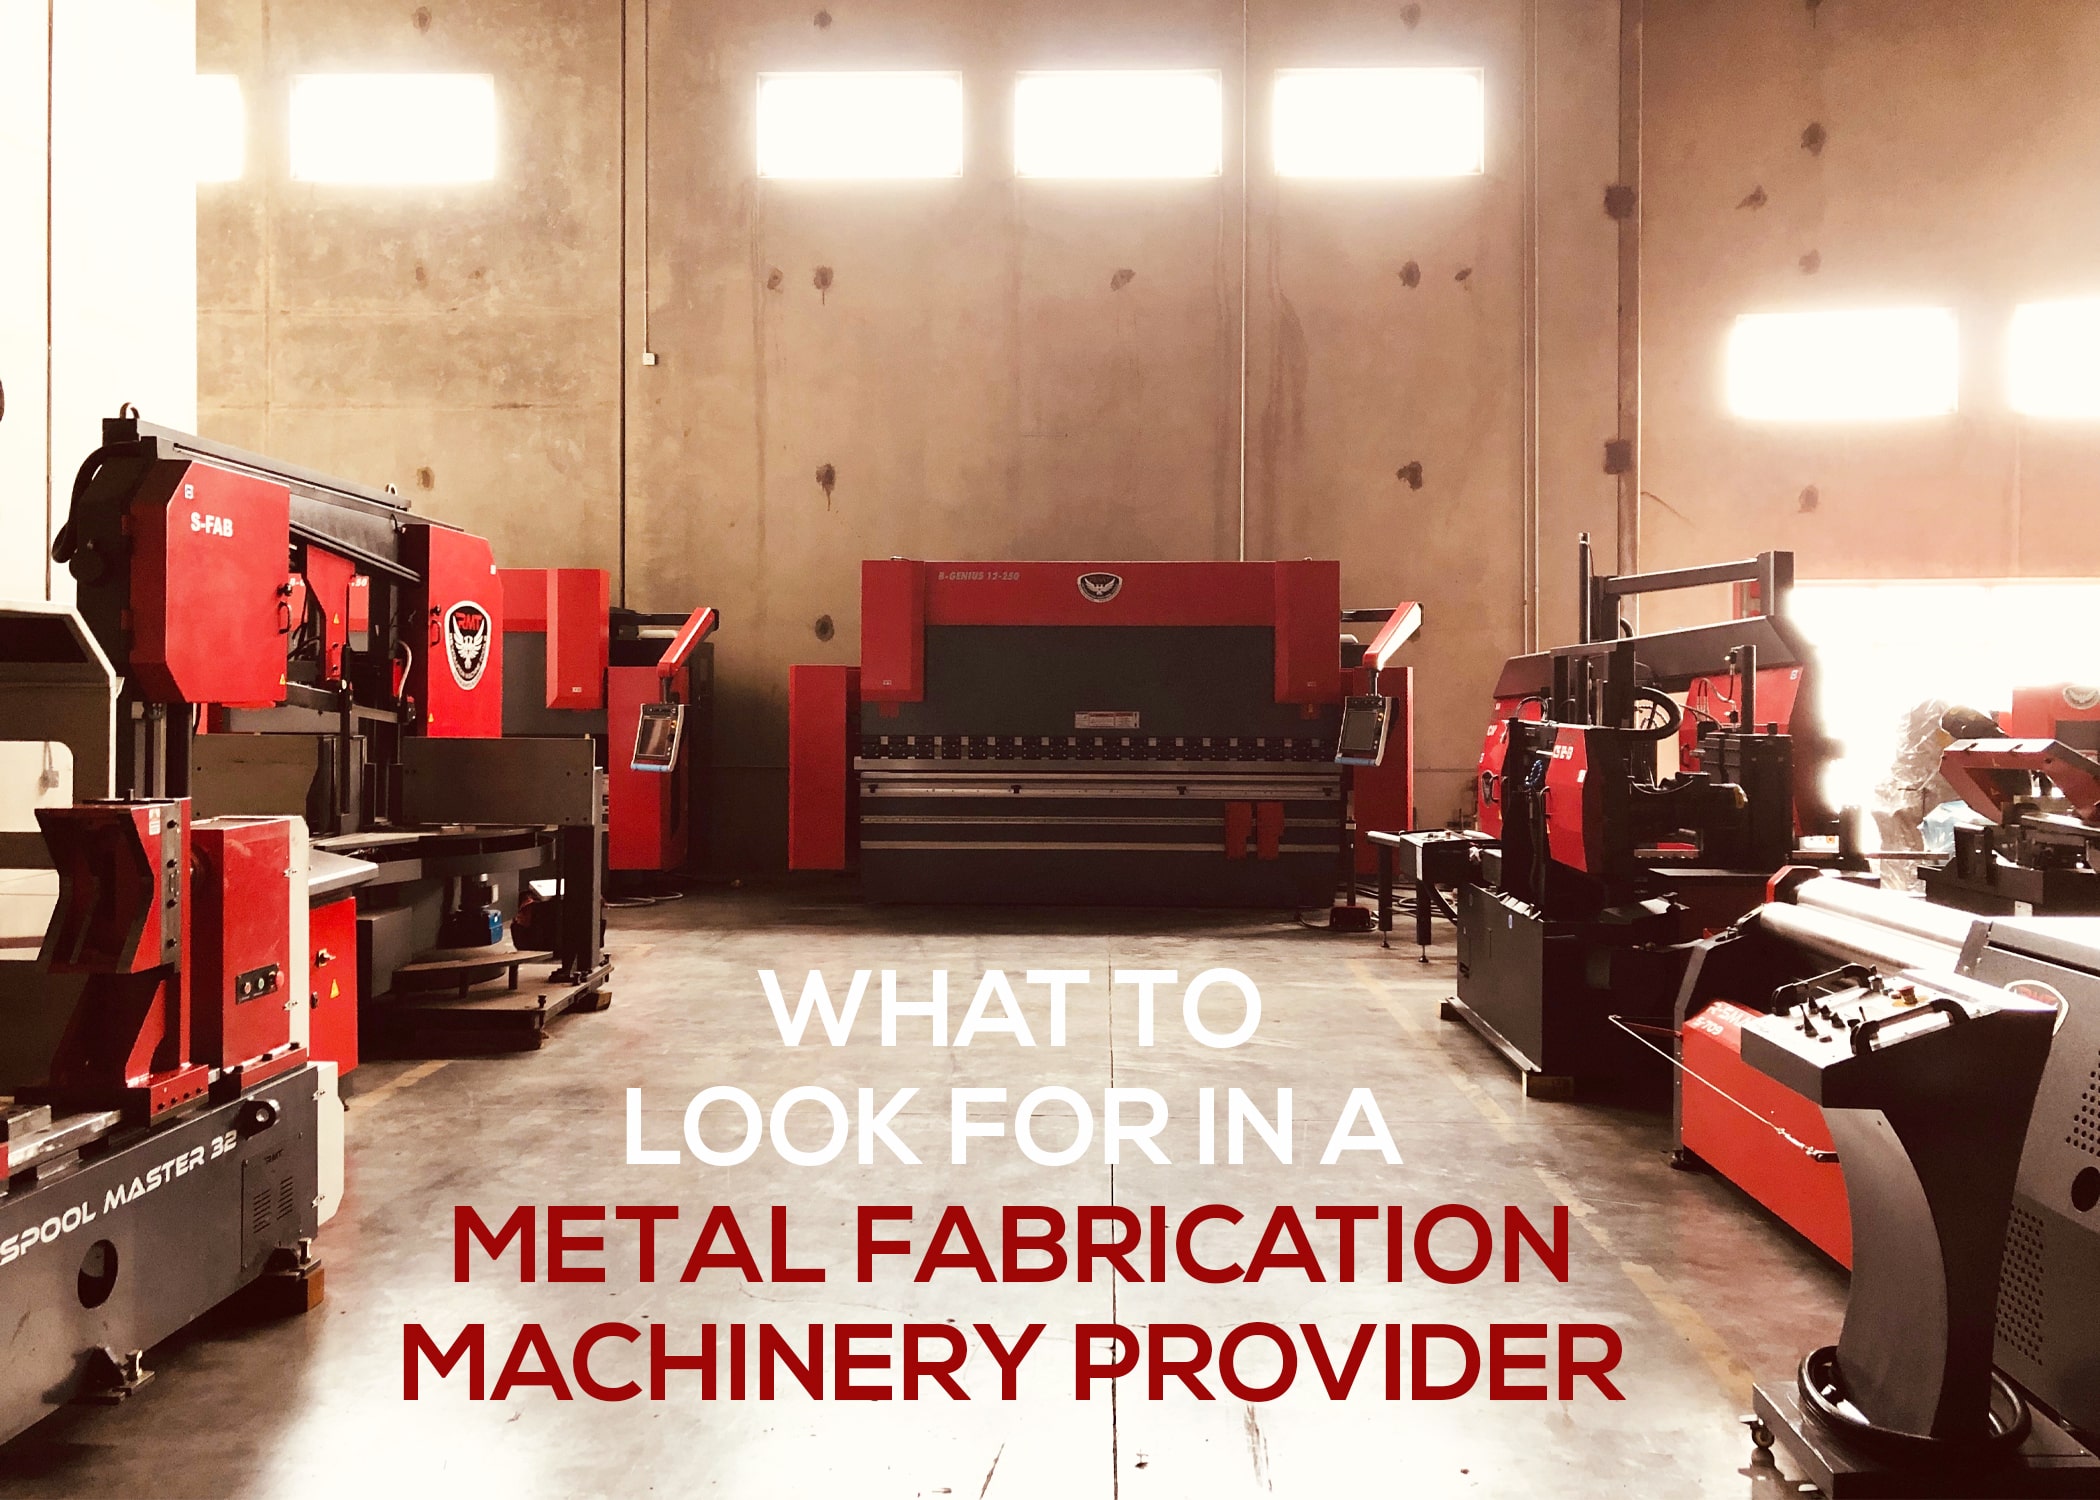 What to Look for in a Metal Fabrication Machinery Provider